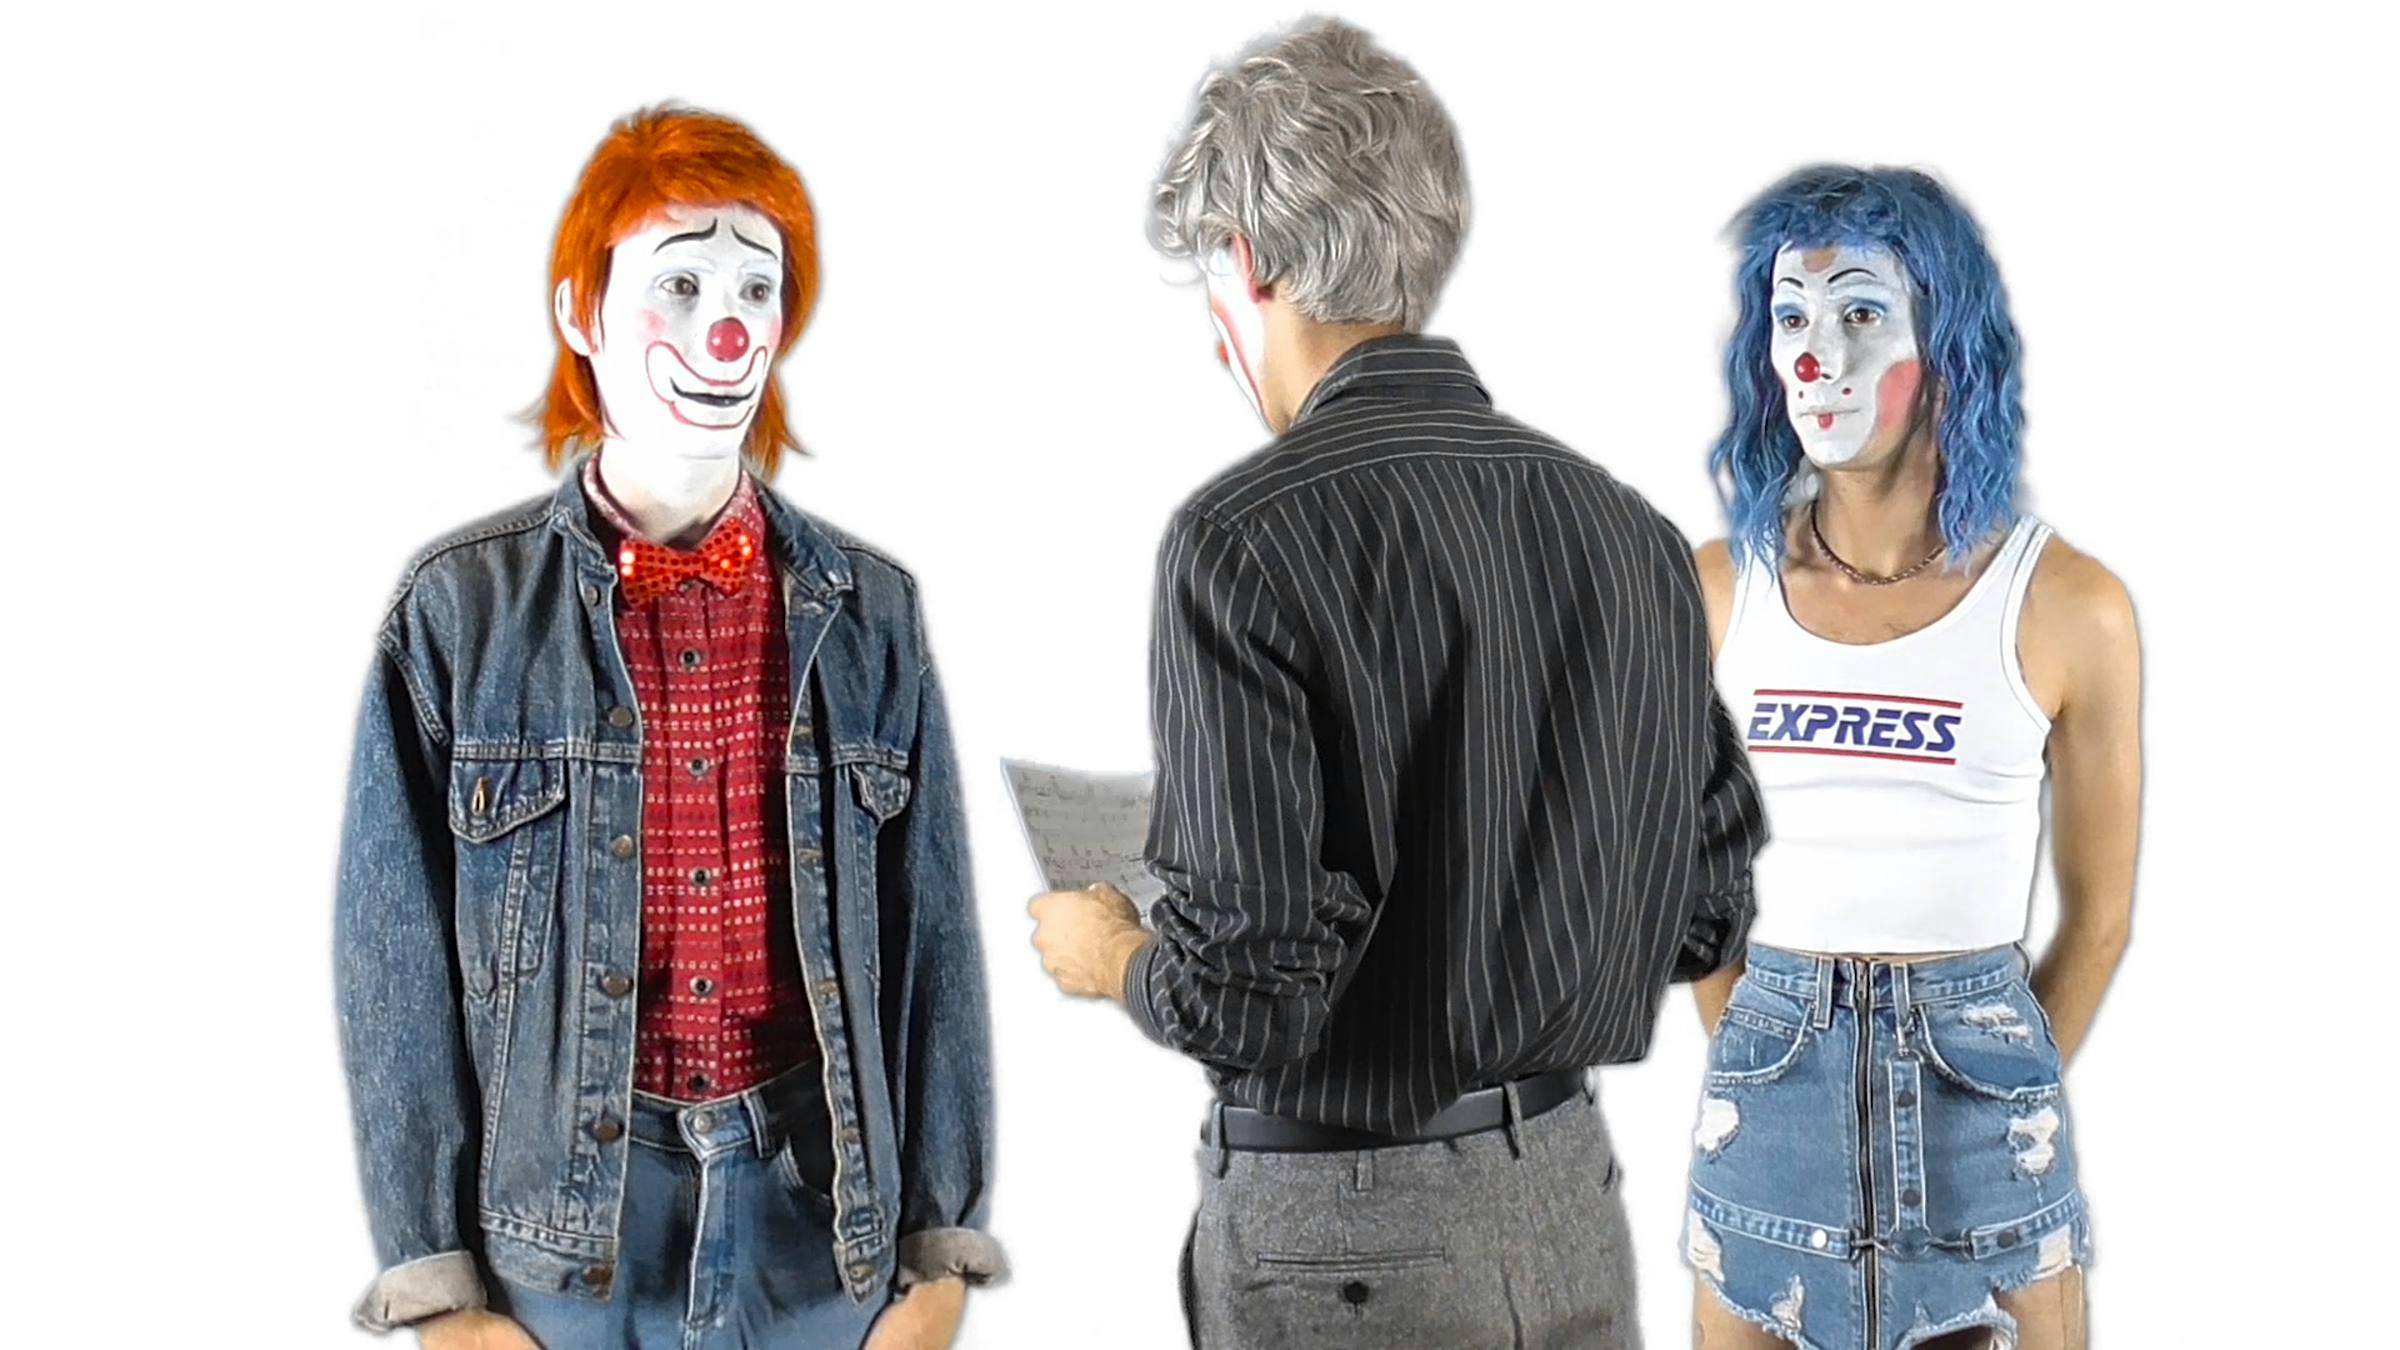 Image of three people who each have clown-like makeup painted onto their faces. Two  of the people face the camera and the other has their back turned and is reading from a piece of paper.